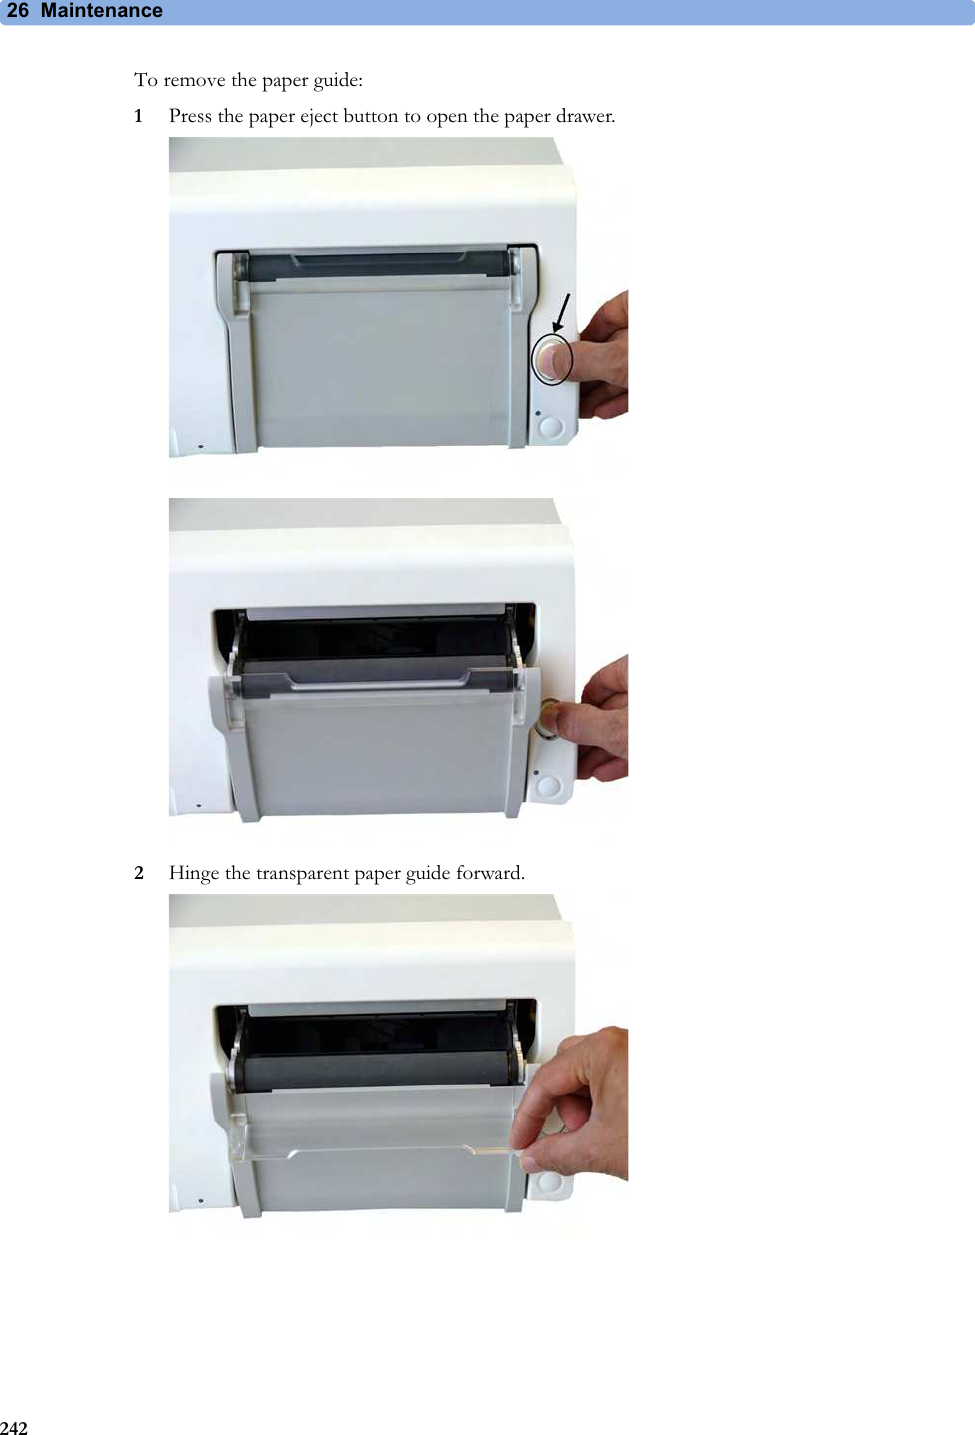 26  Maintenance242To remove the paper guide:1Press the paper eject button to open the paper drawer.2Hinge the transparent paper guide forward.